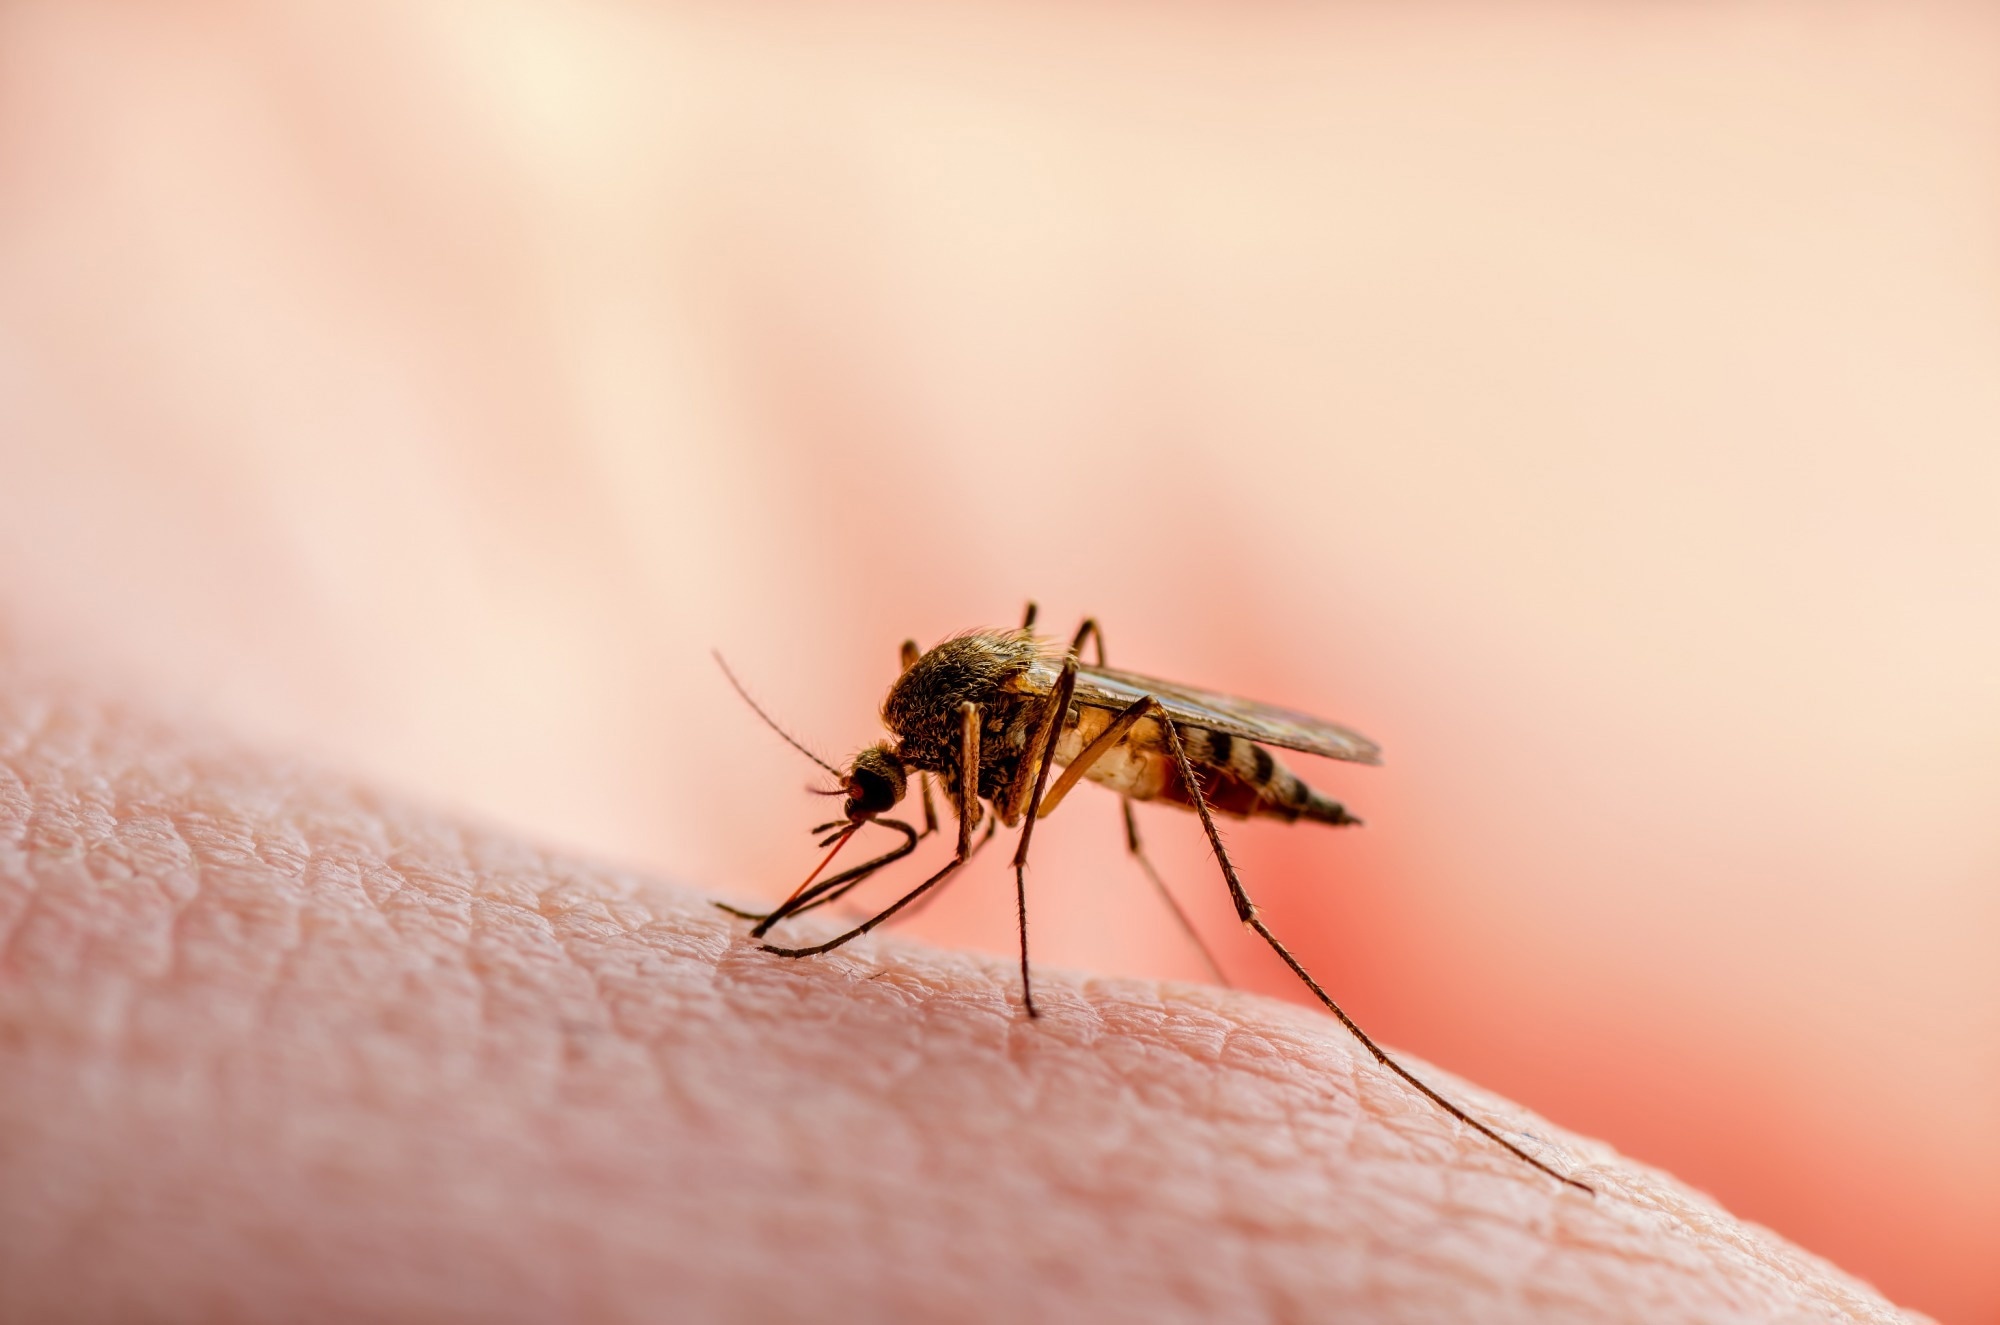 Study: Urban malaria may be spreading via the wind—here’s why that’s important. Image Credit: nechaevkon/Shutterstock.com